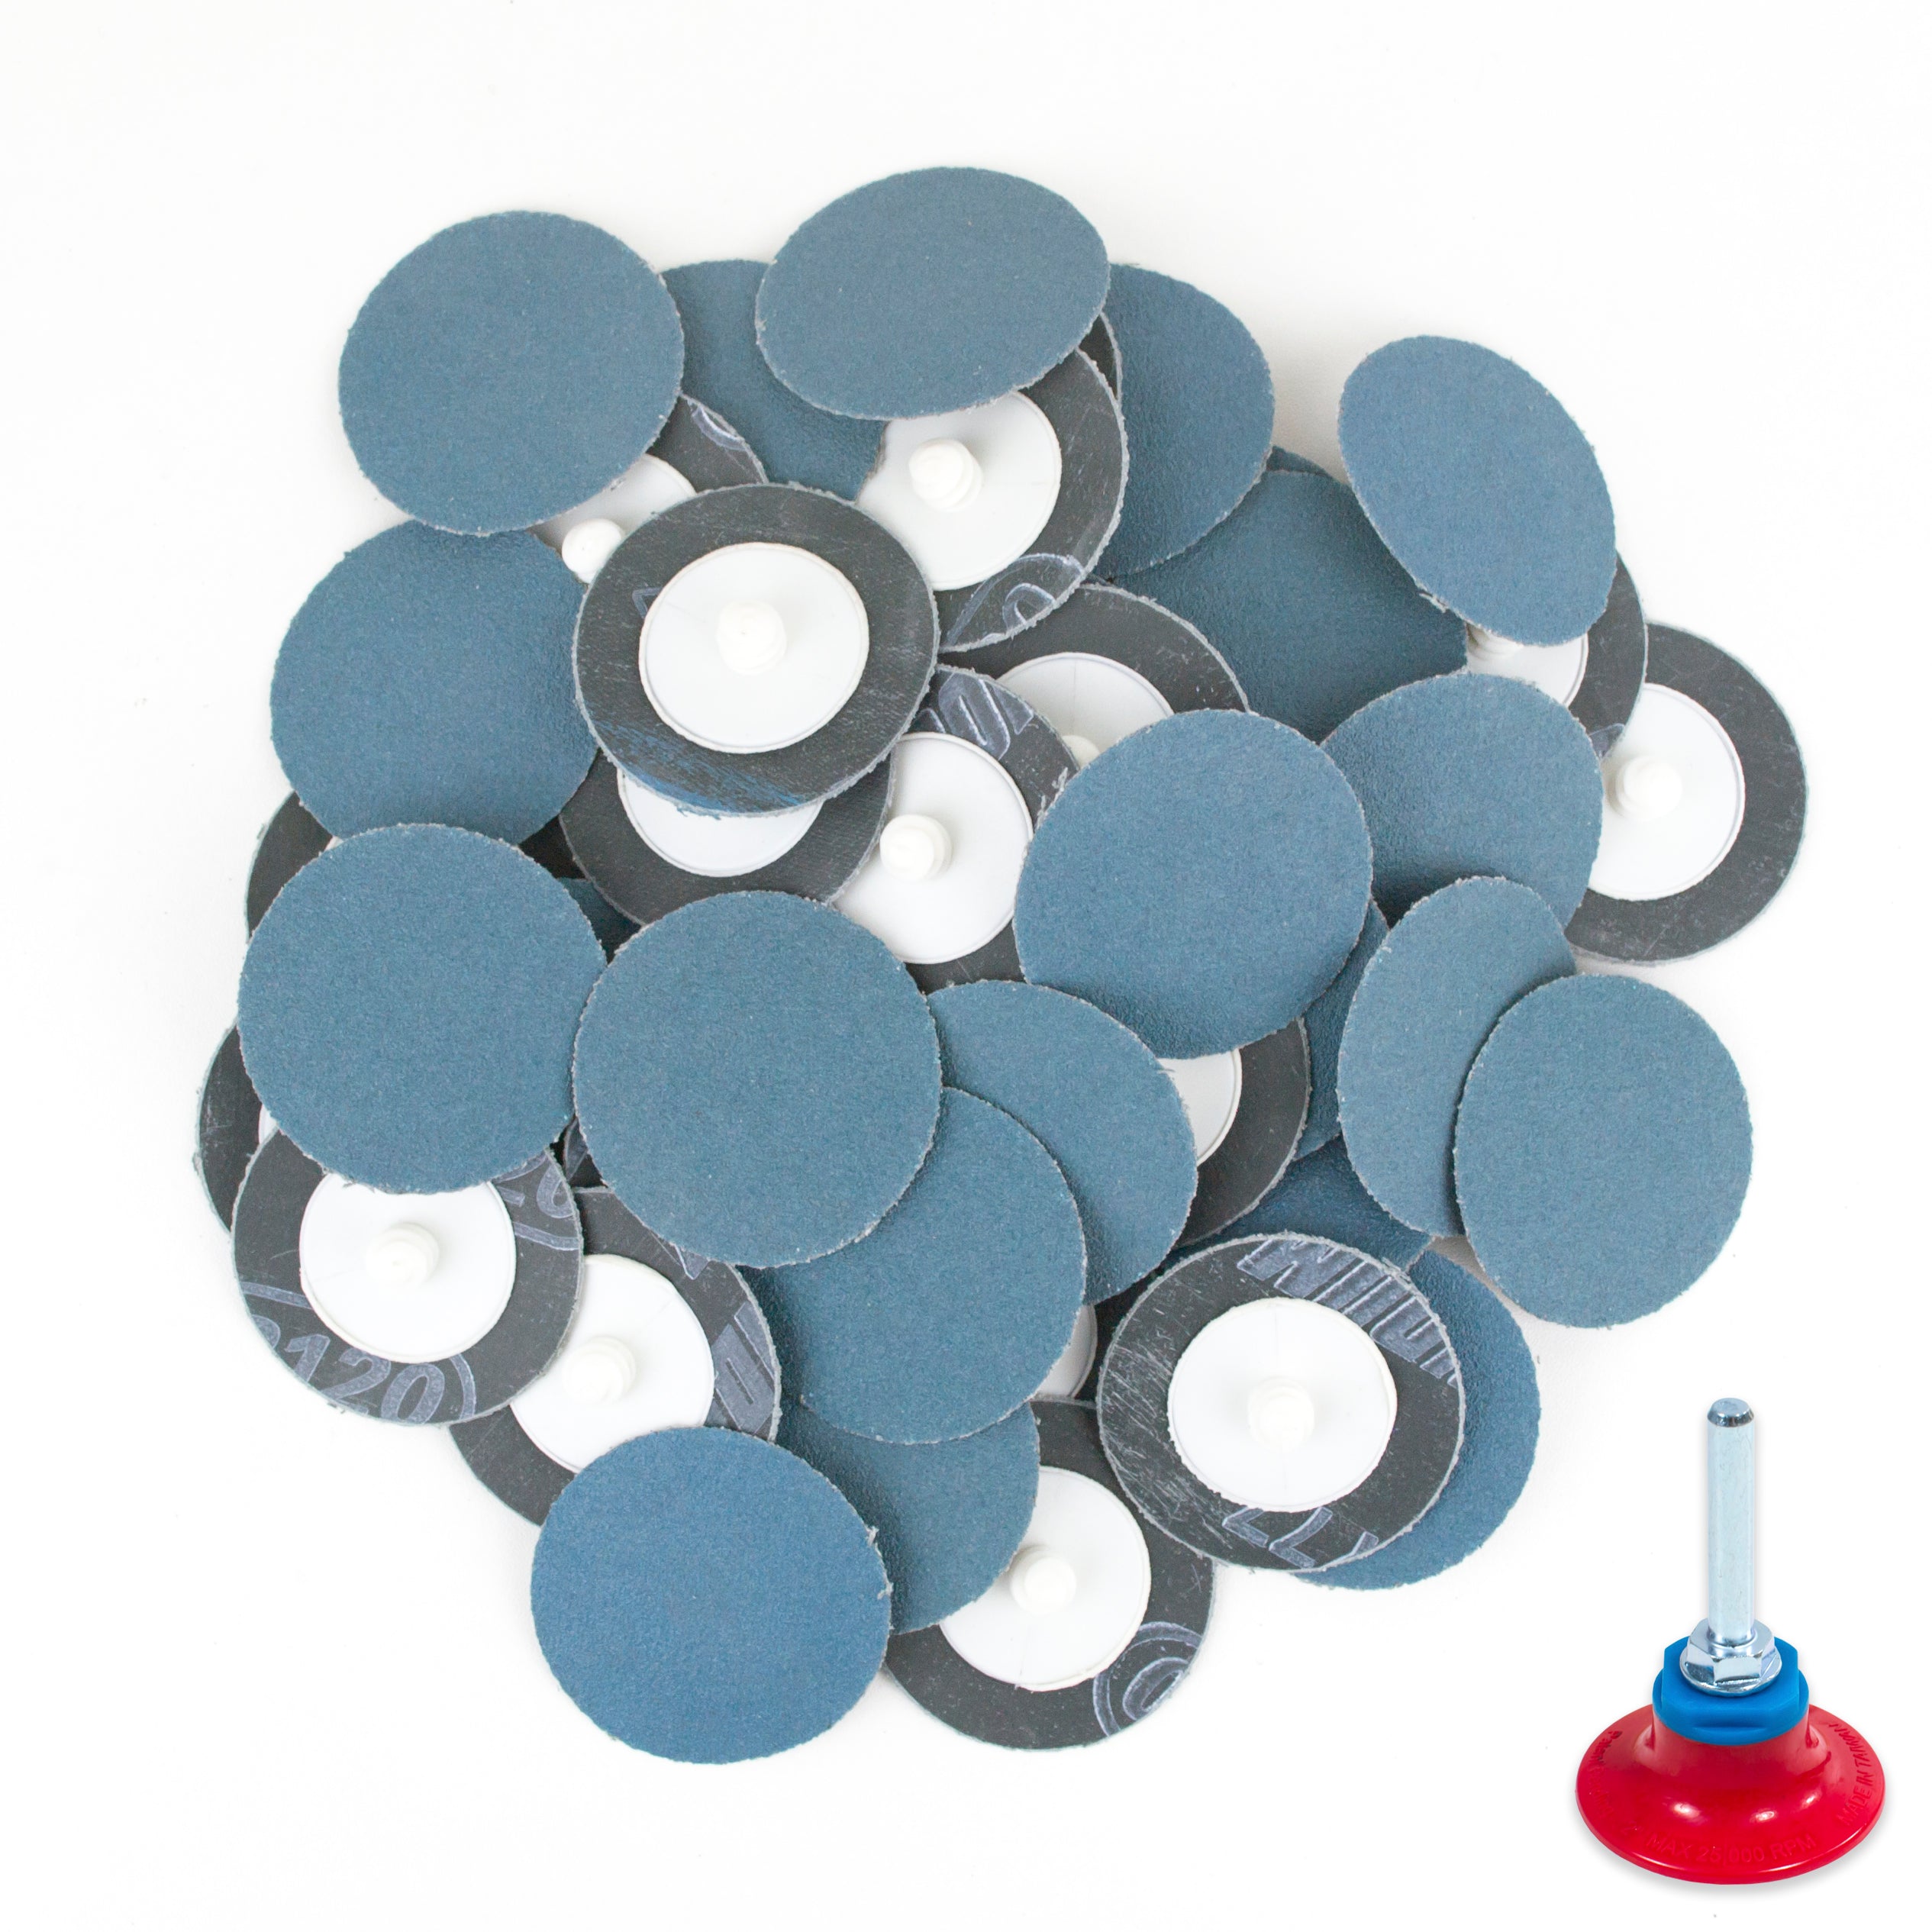 2 inch 120 Grit Zirconia “Roloc” Roll-On Type Abrasive Sanding Discs (50 pcs) with Holder